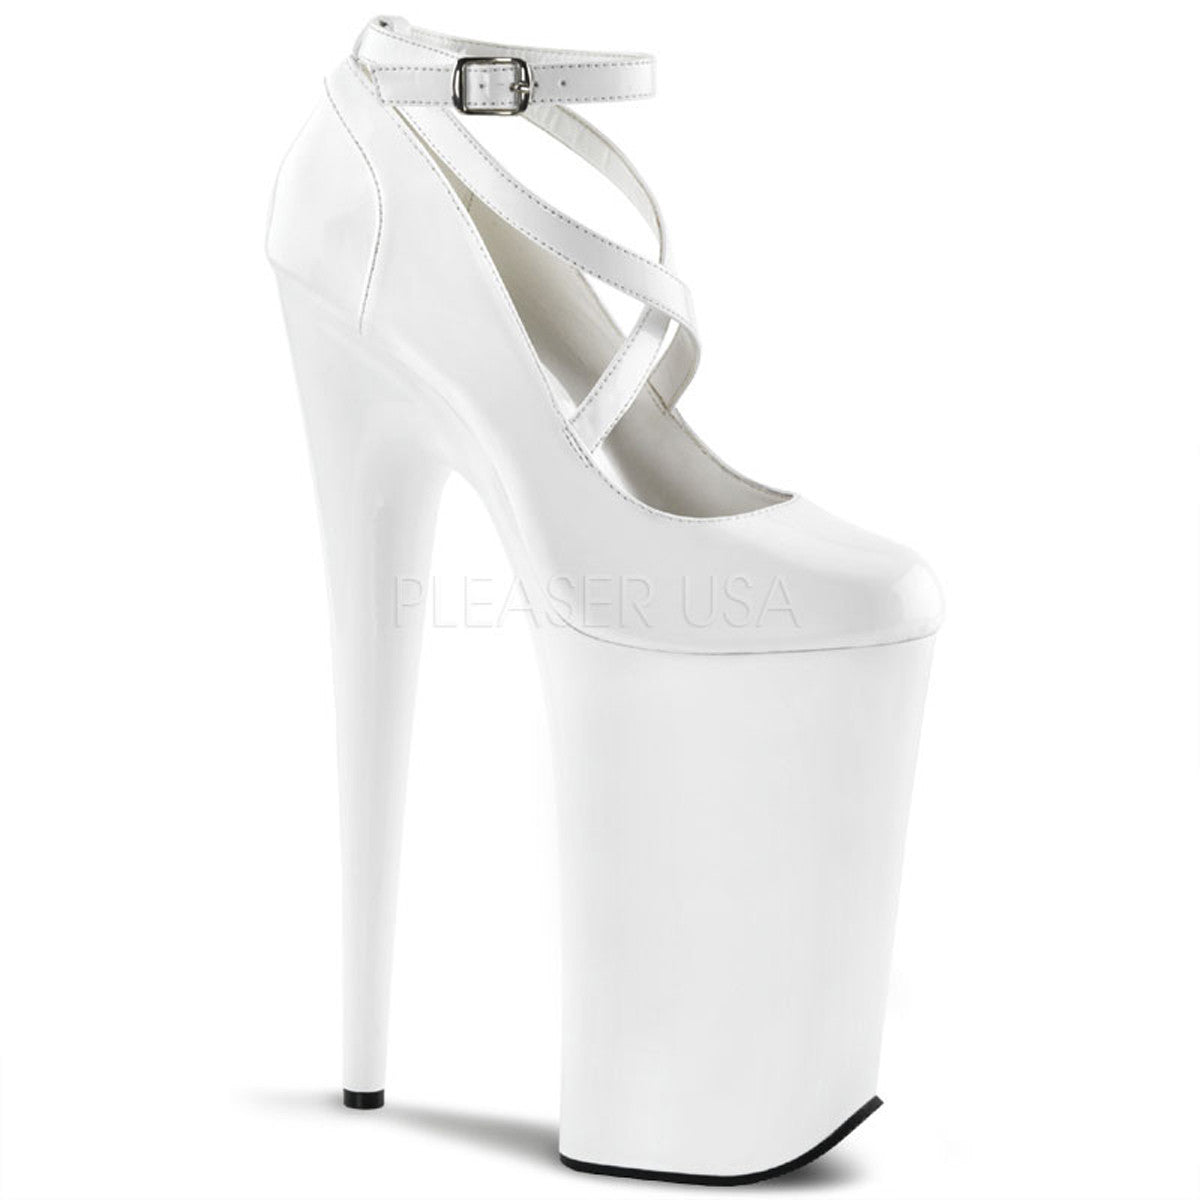 PLEASER BEYOND-087 White Extreme 10 Inch High Heels - Shoecup.com - 1